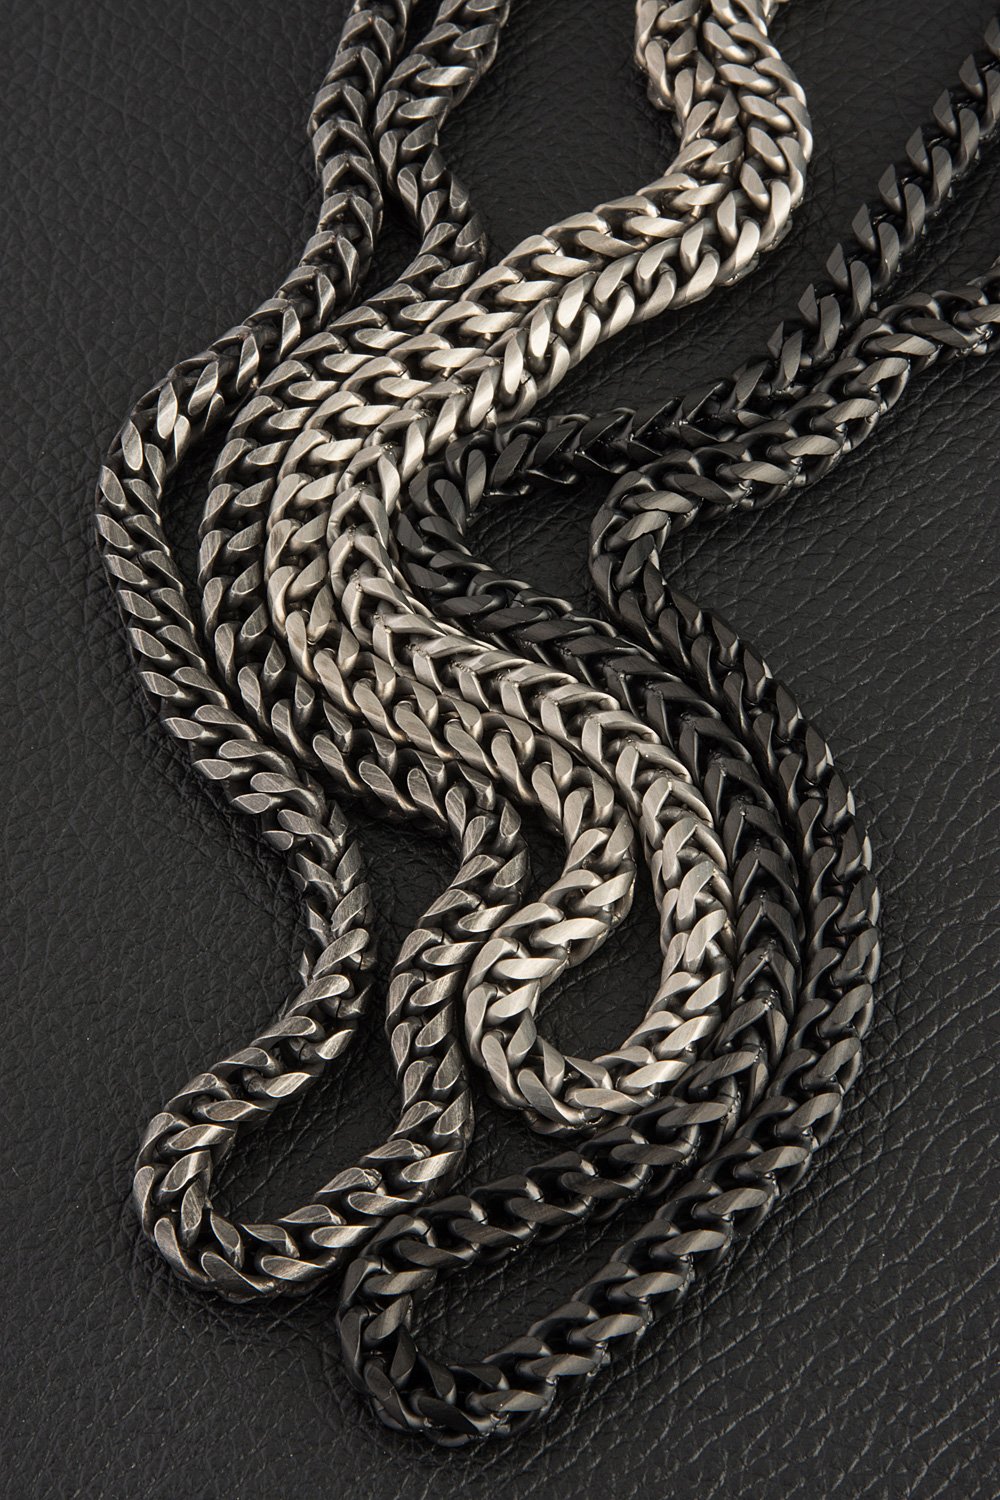 Gauntlet Steel Necklace Chain -  Brushed Silver (6mm)